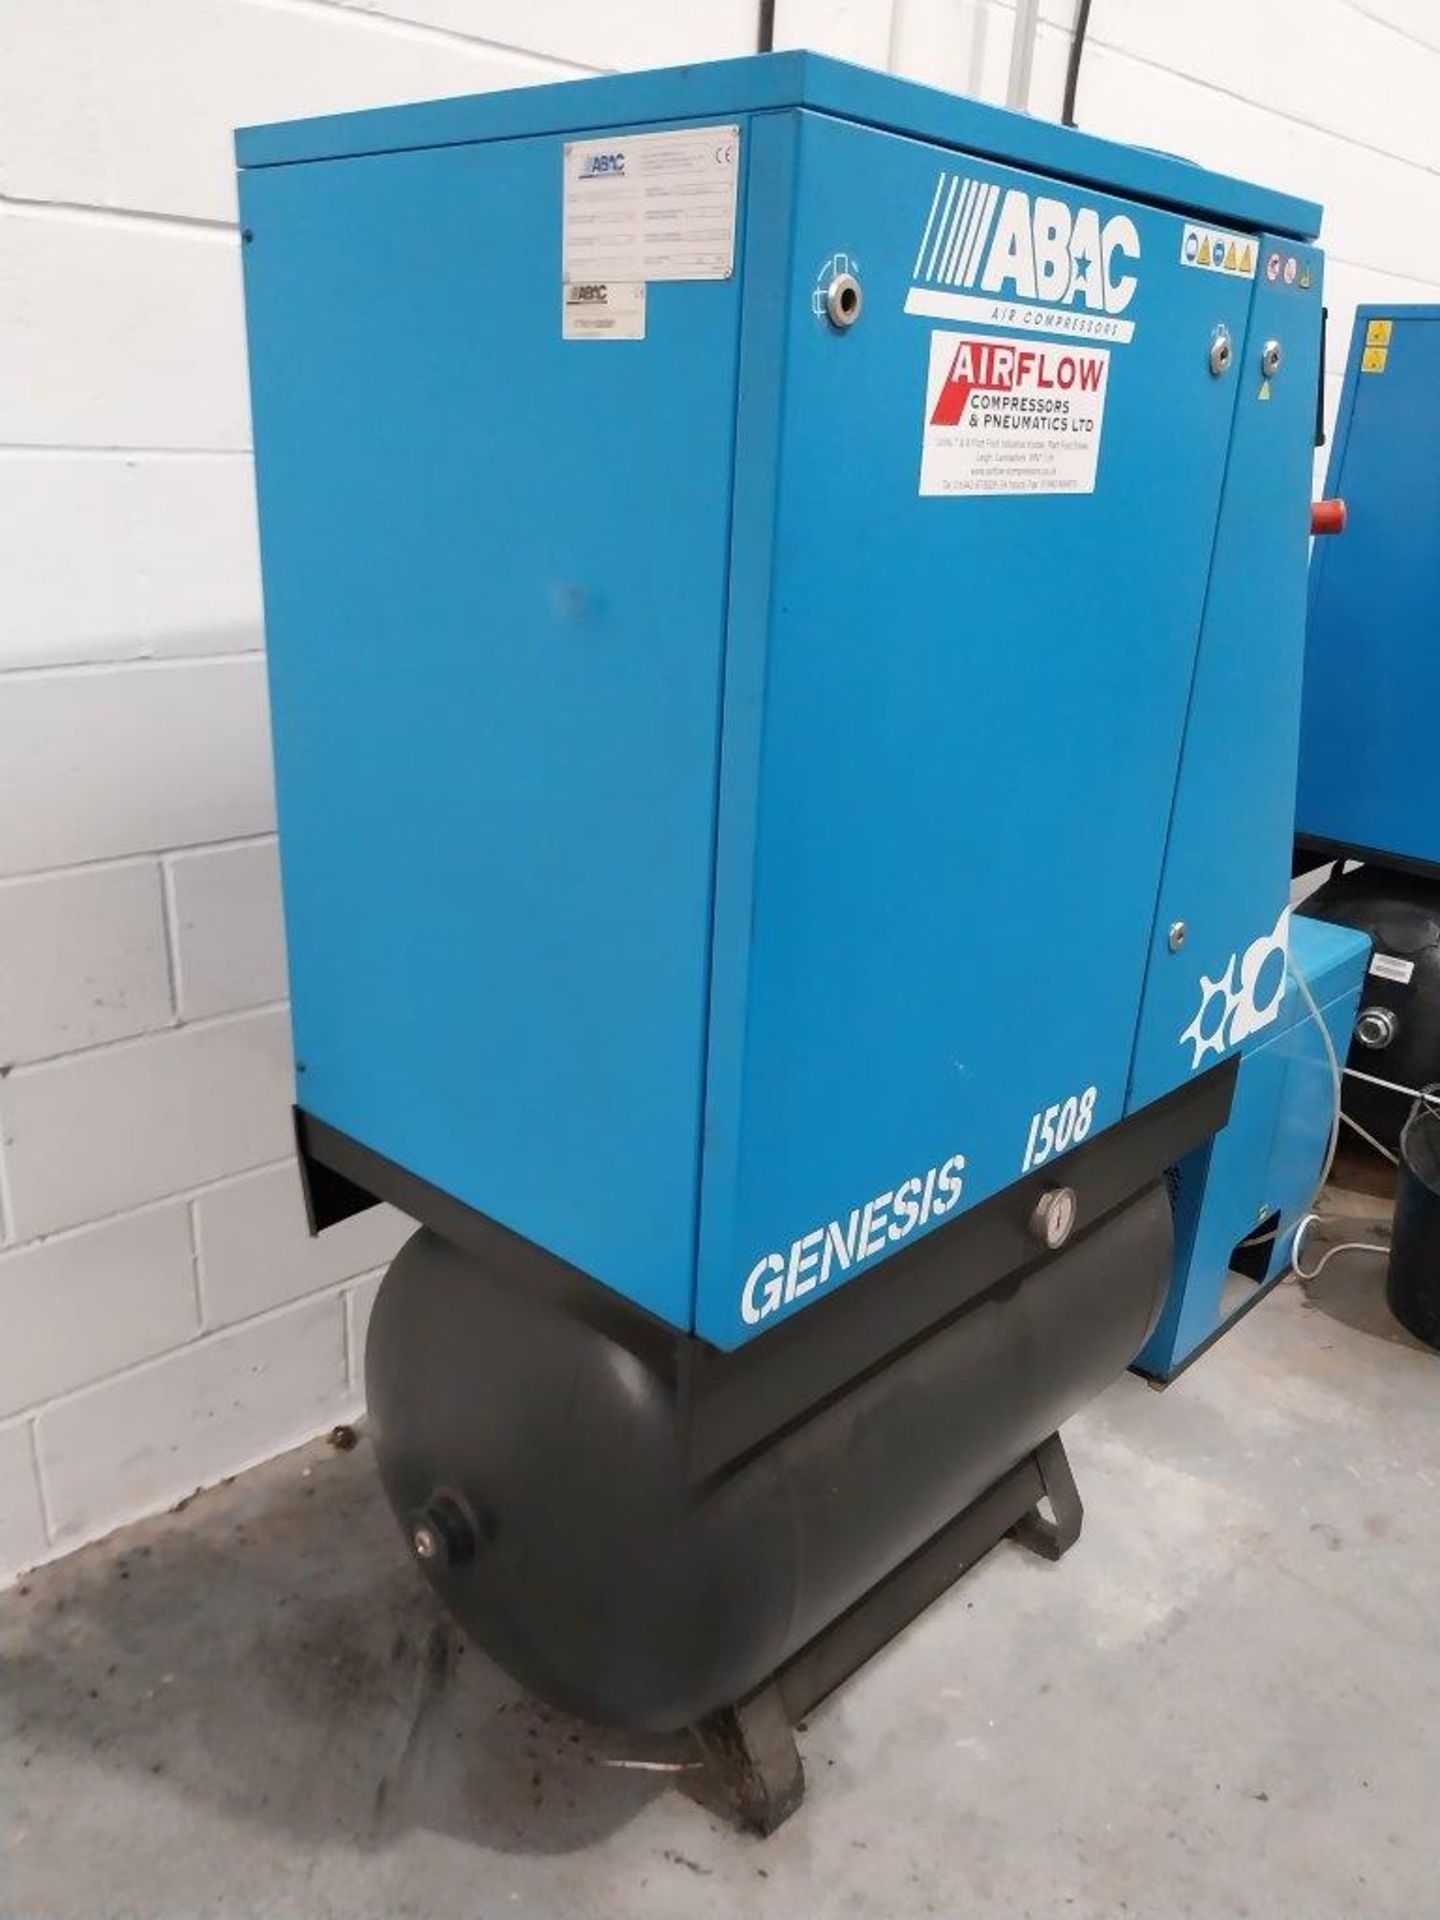 ABAC Genesis 1508 8 bar screw compressor Serial number ITR0108981, free air delivery 2.32m³ / min - Image 3 of 5